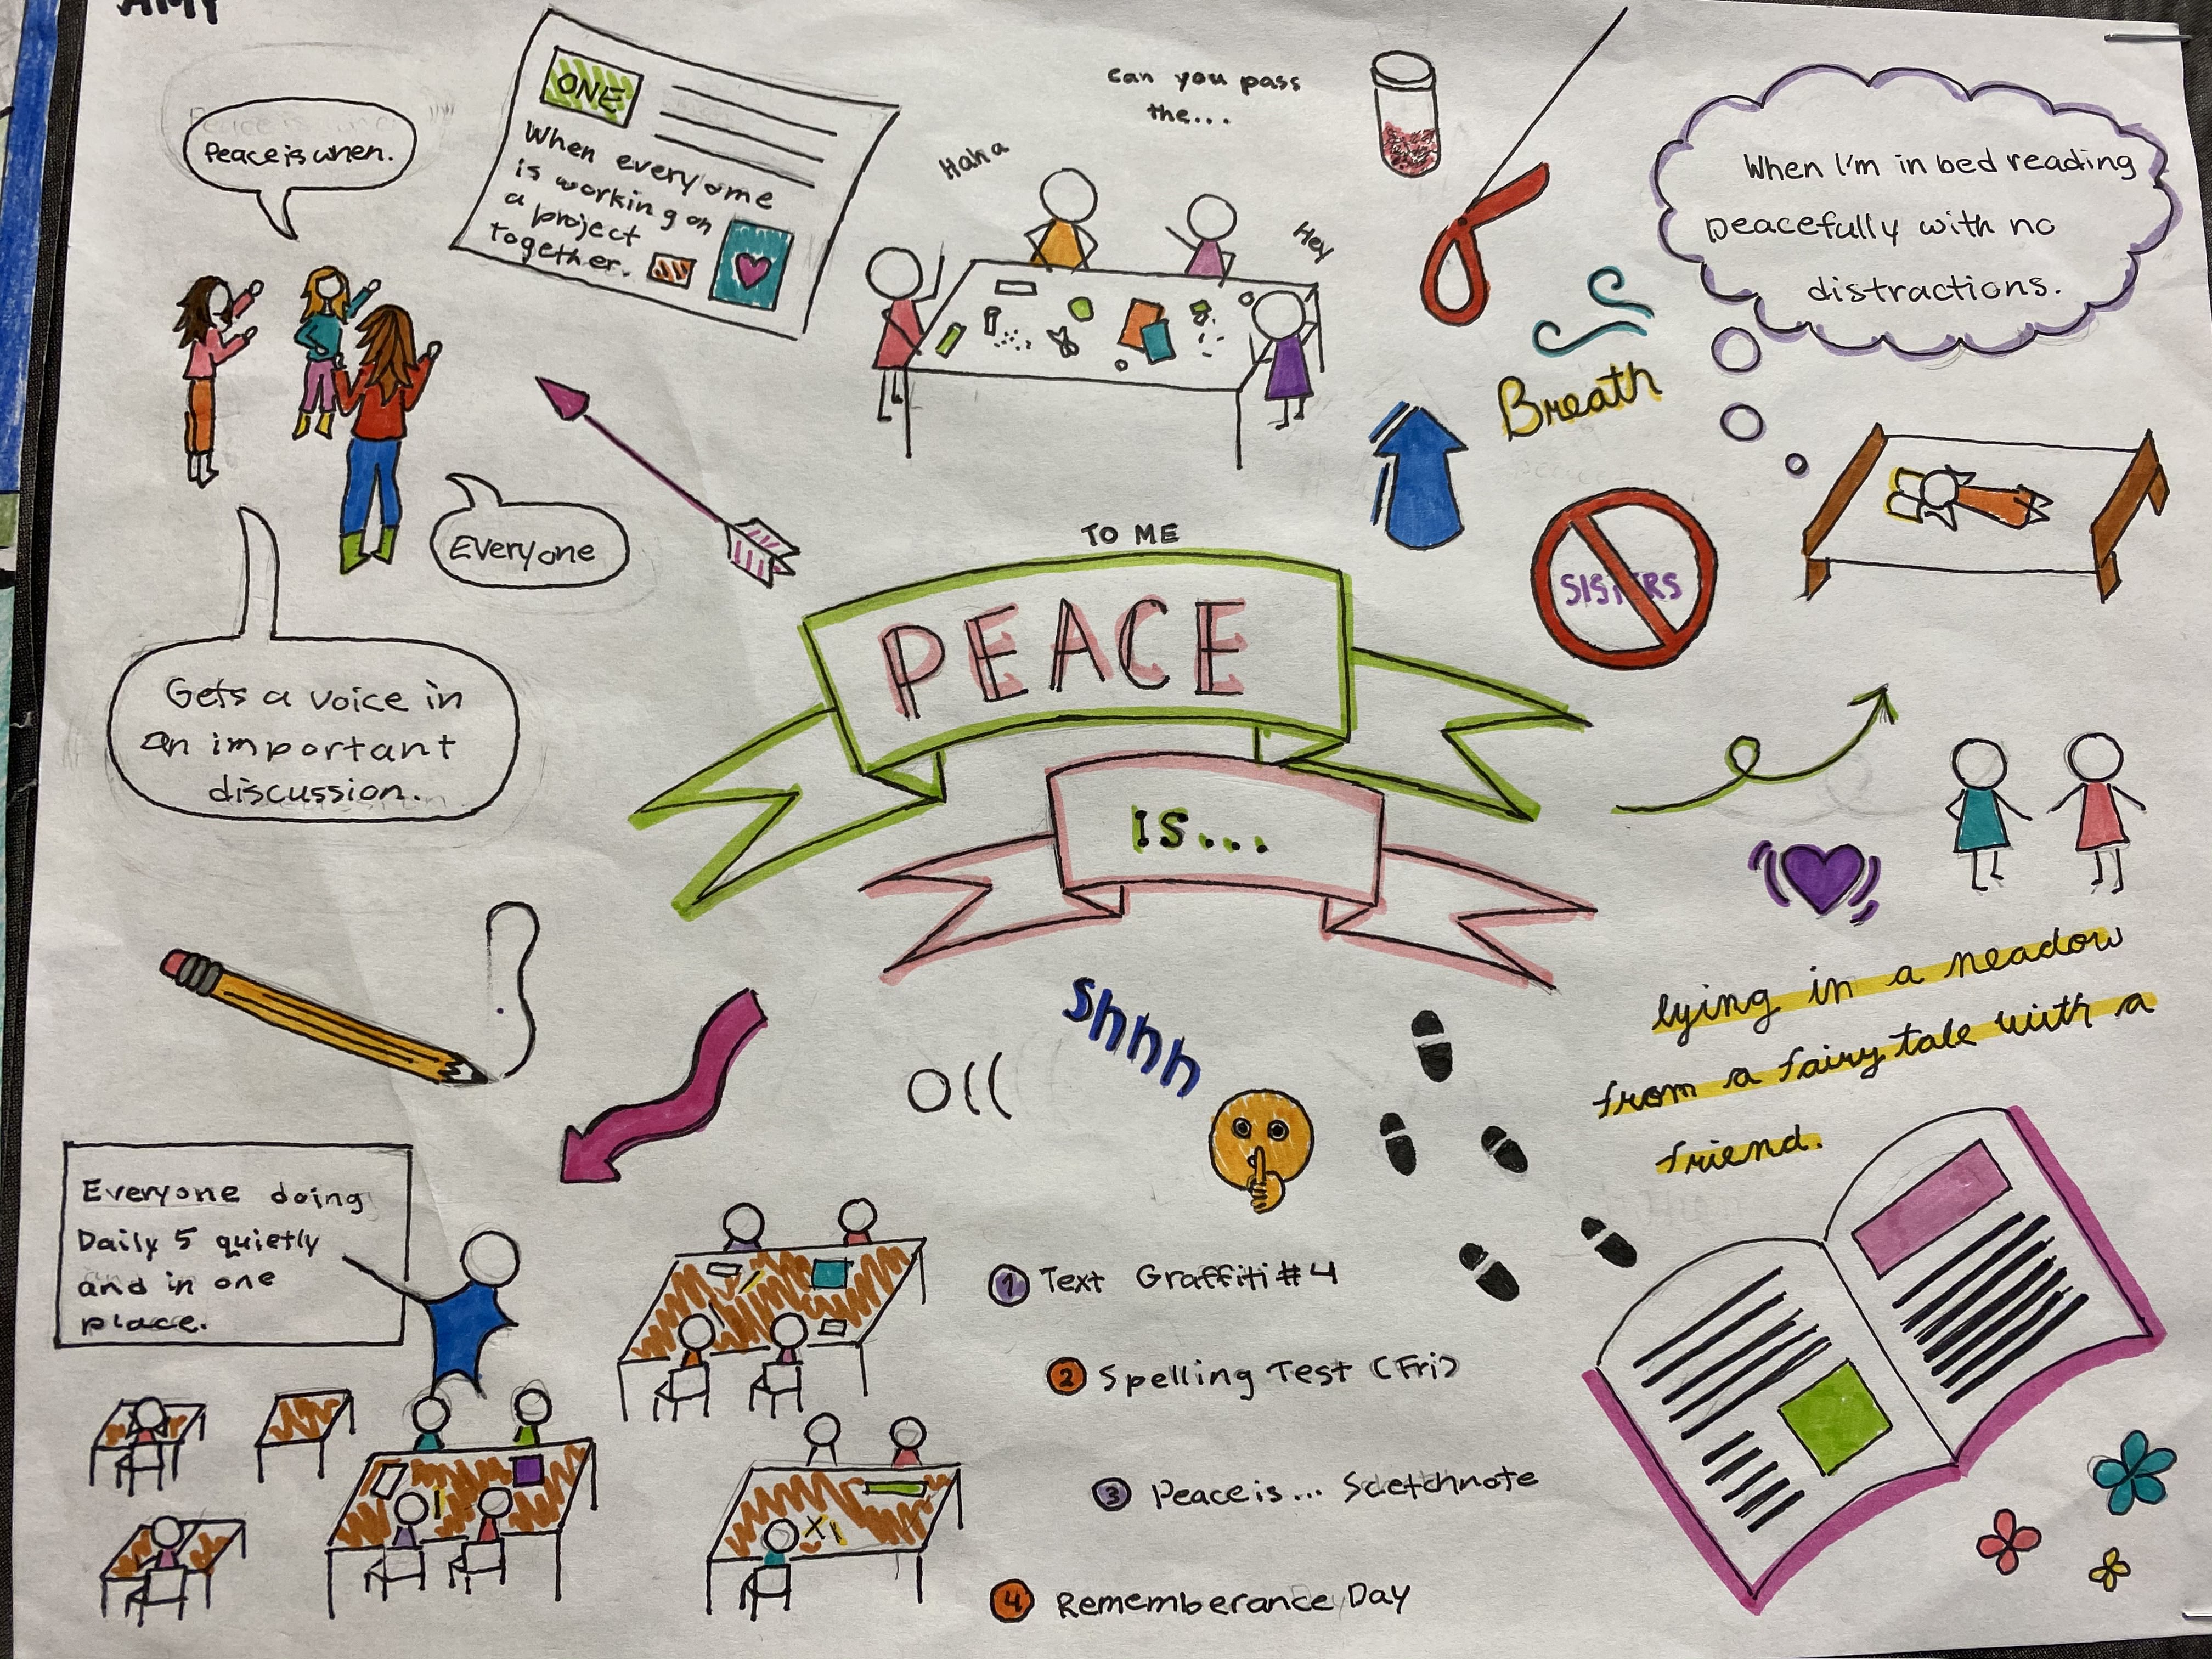 Student work on paper - "Peace Is..." sketchnote - depicts what brings this student peace